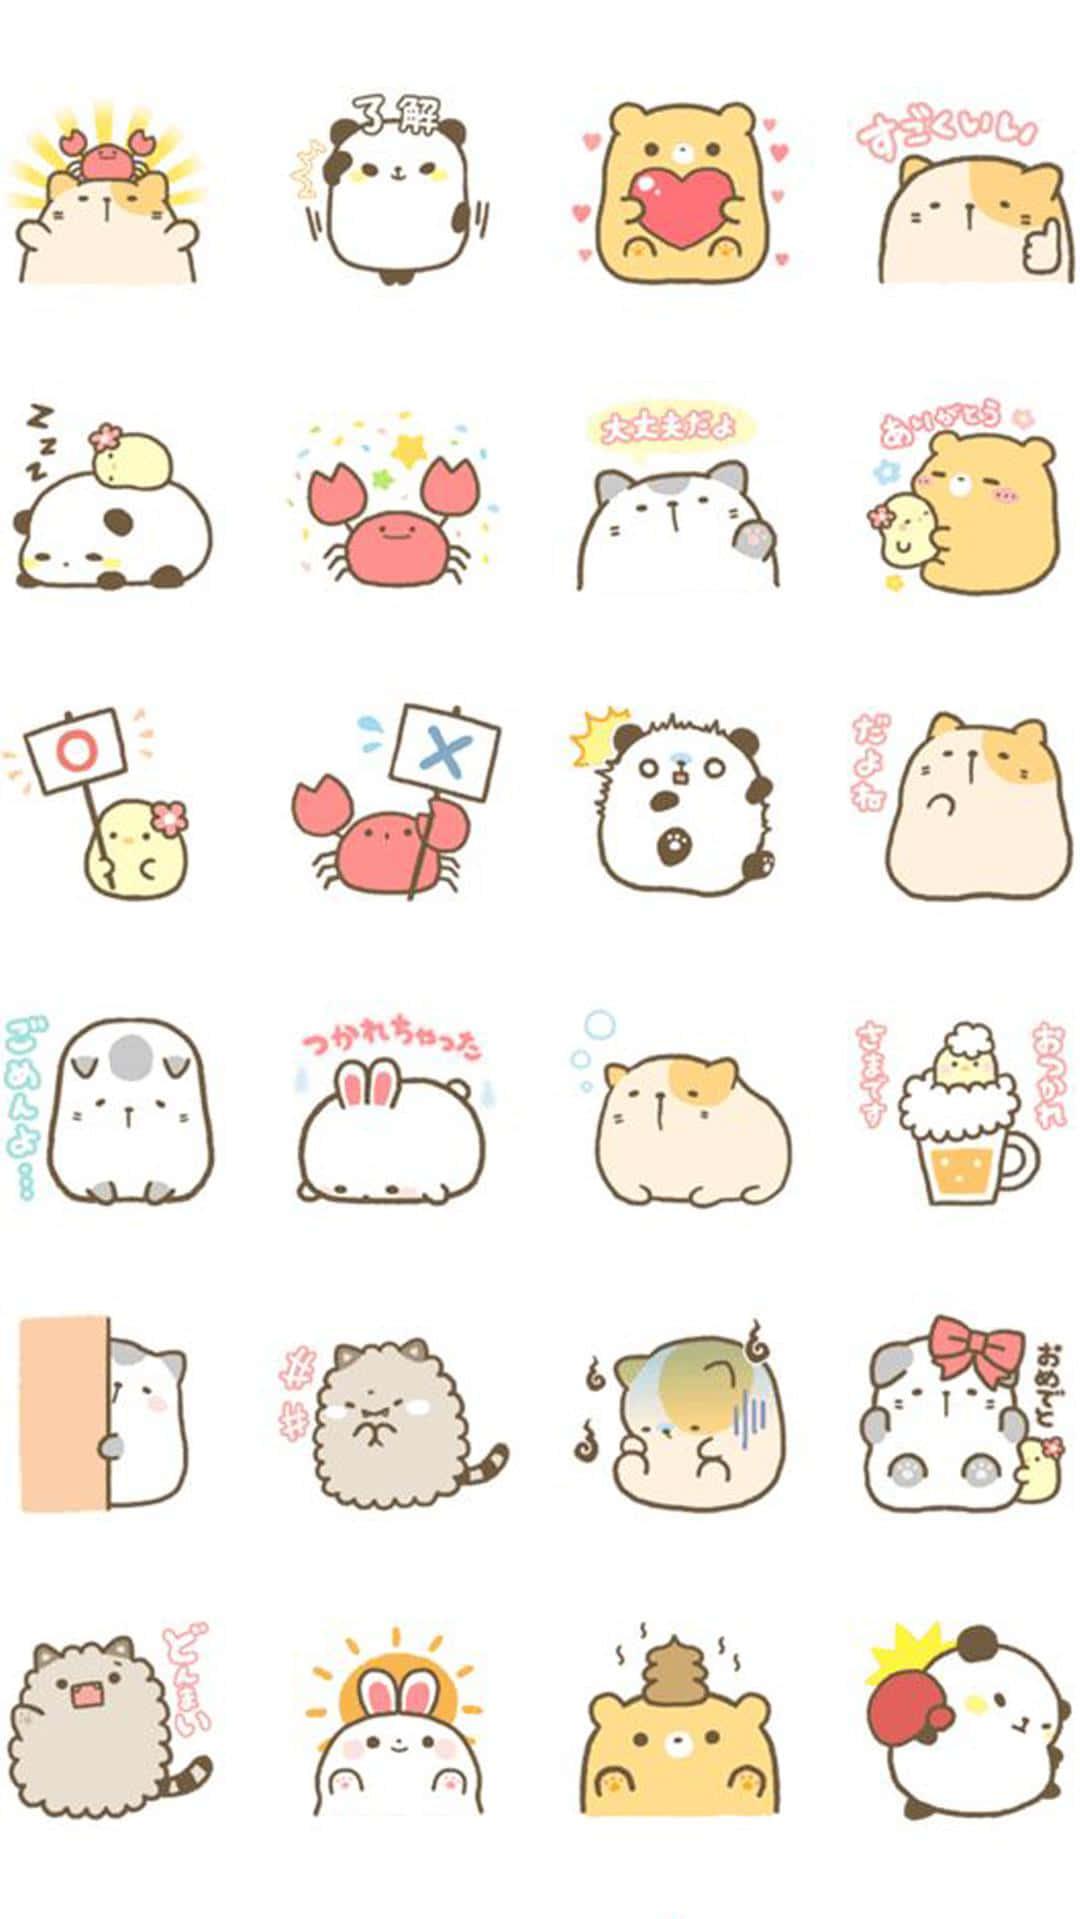 A Variety Of Cute Kawaii Stickers With Different Faces